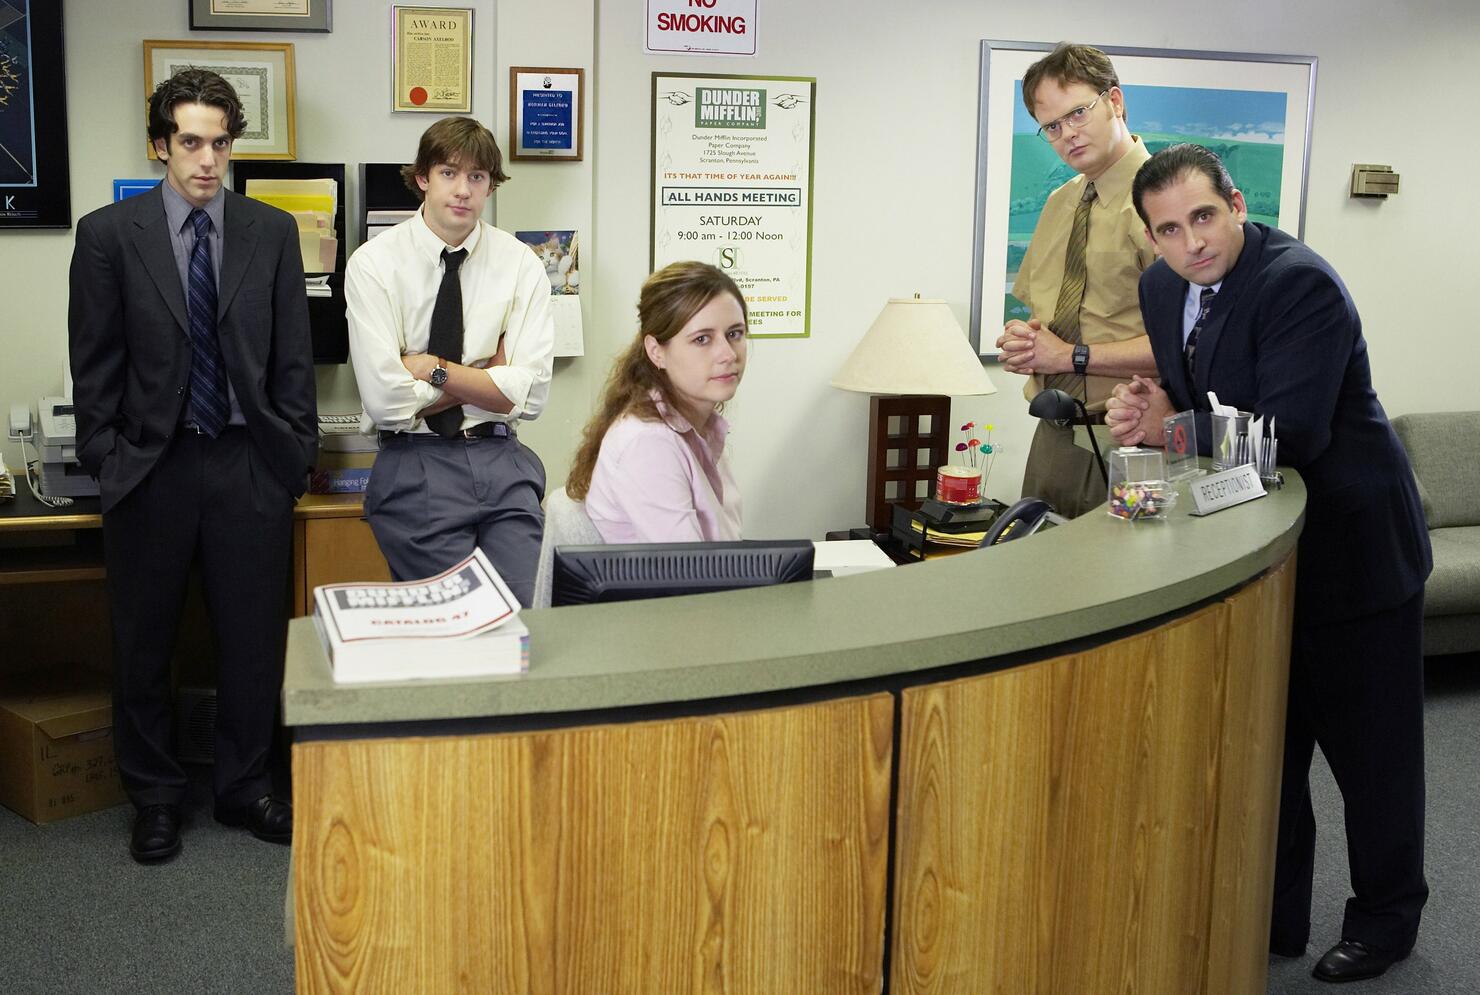 Dunder Mifflin will live beyond 'The Office' with the help of